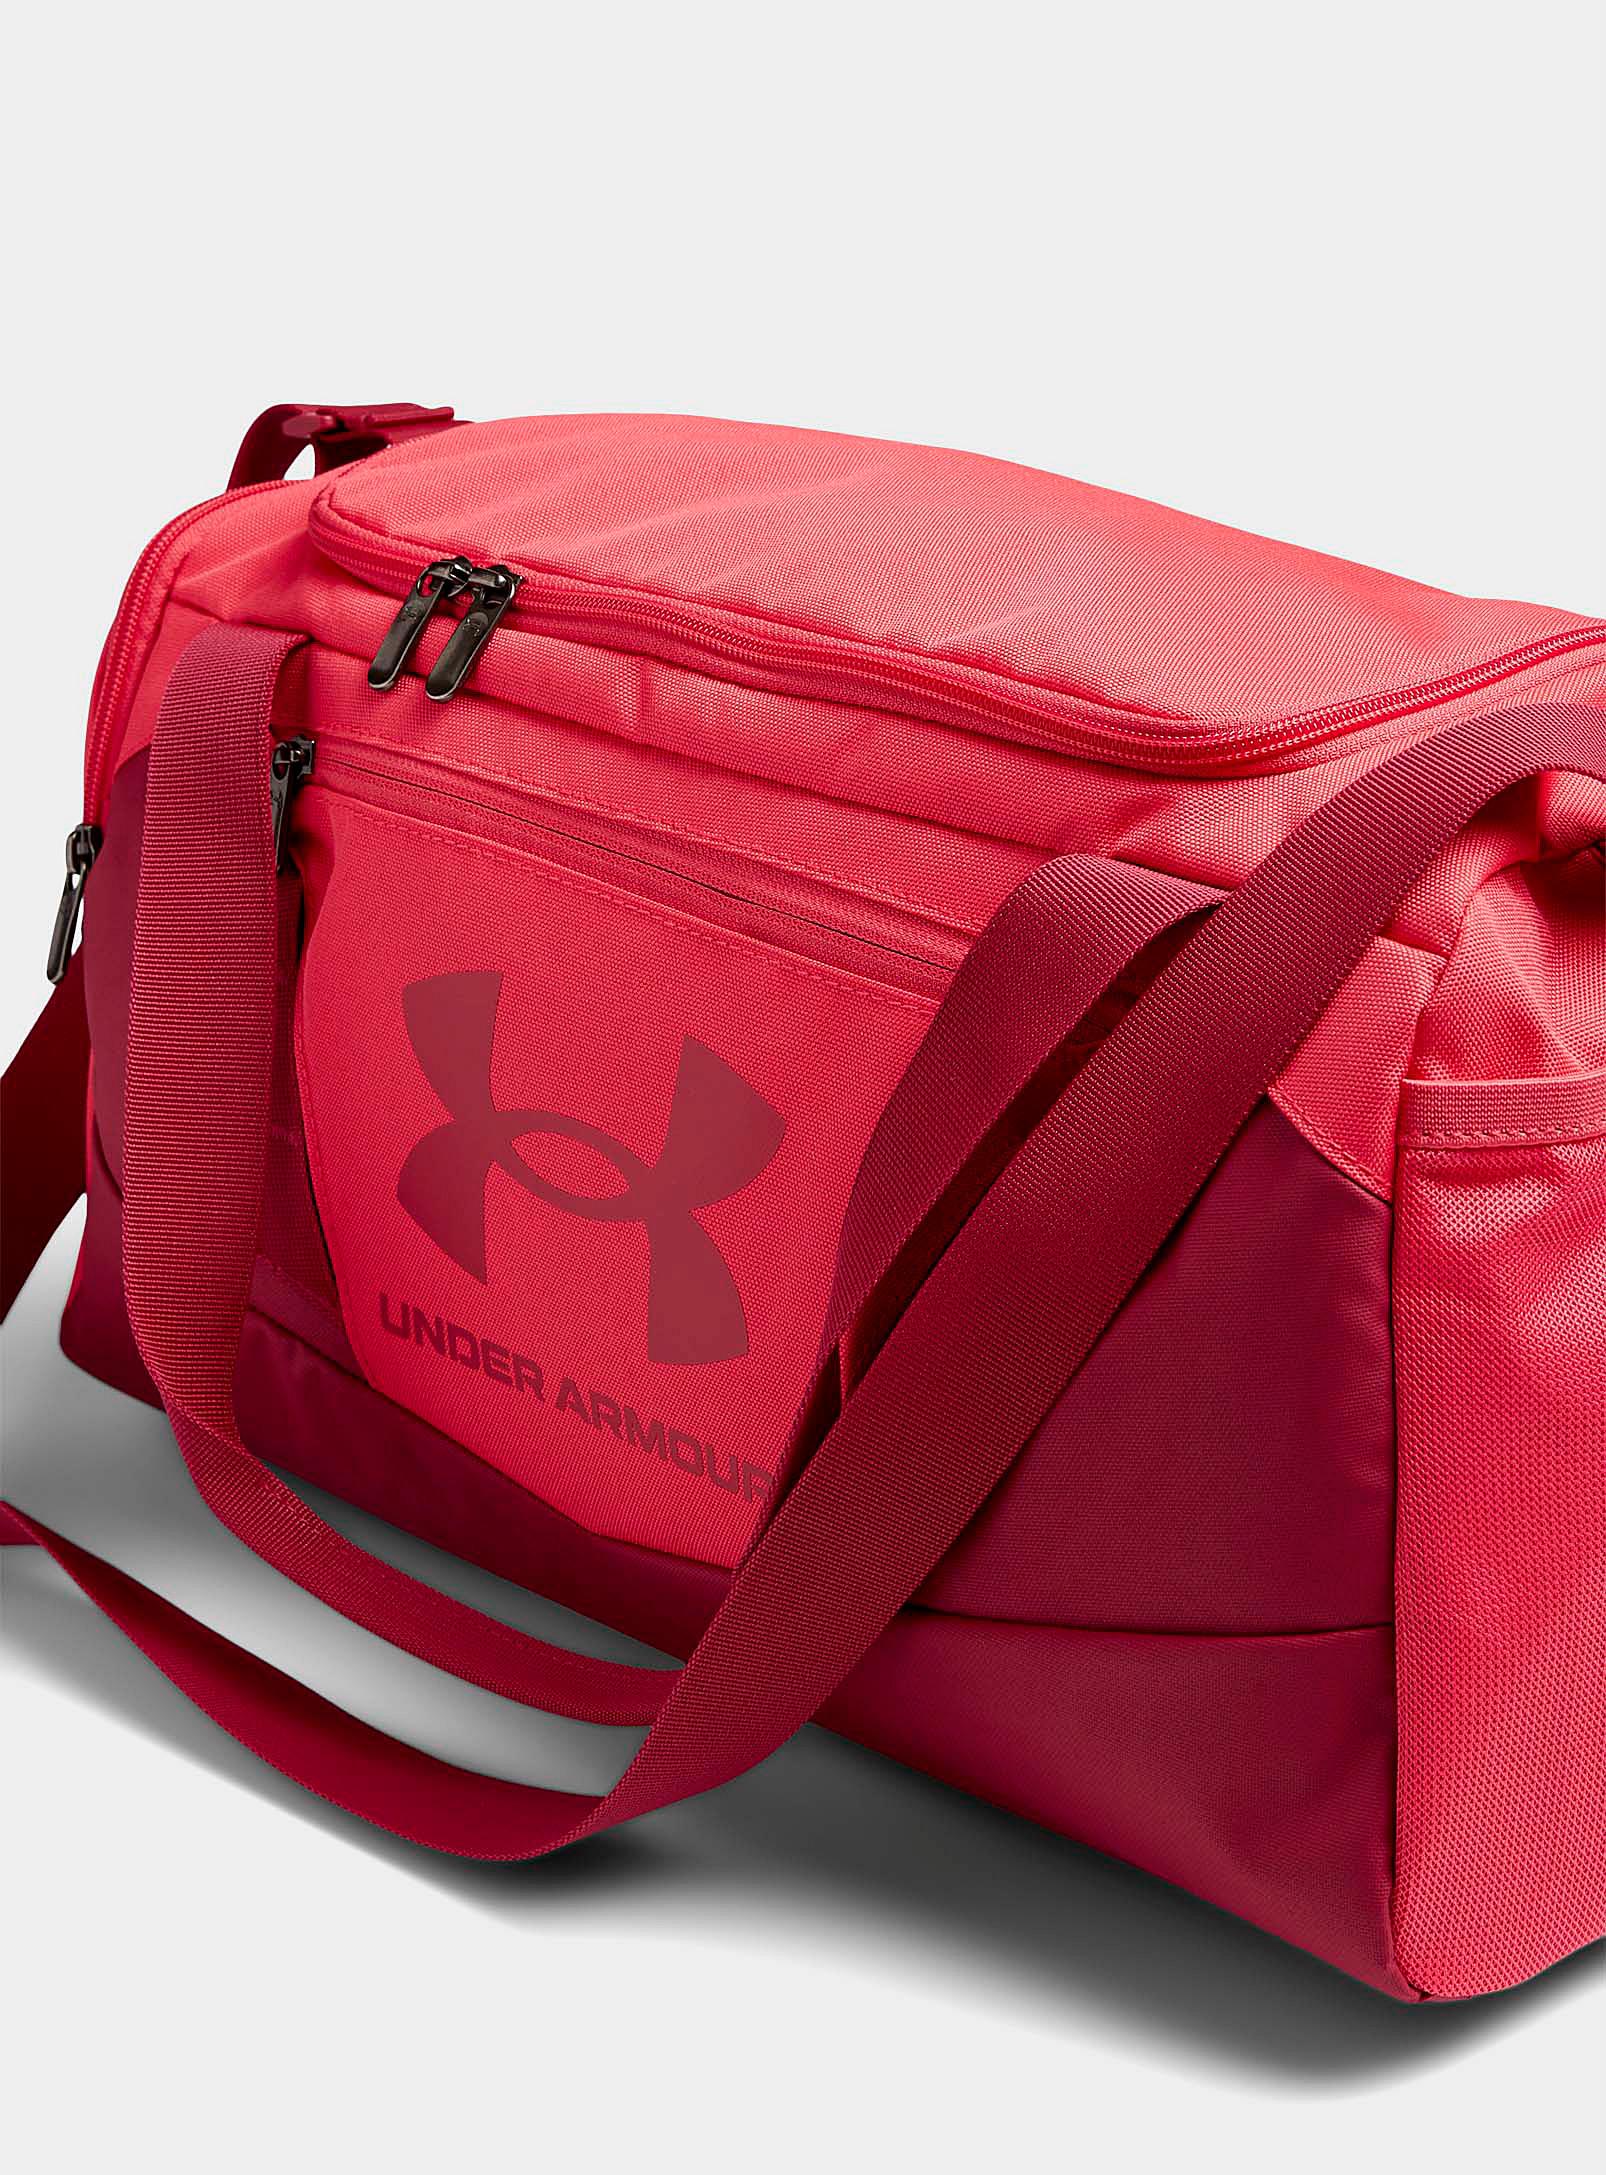 Under Armour Undeniable Pink Duffle Bag | Lyst